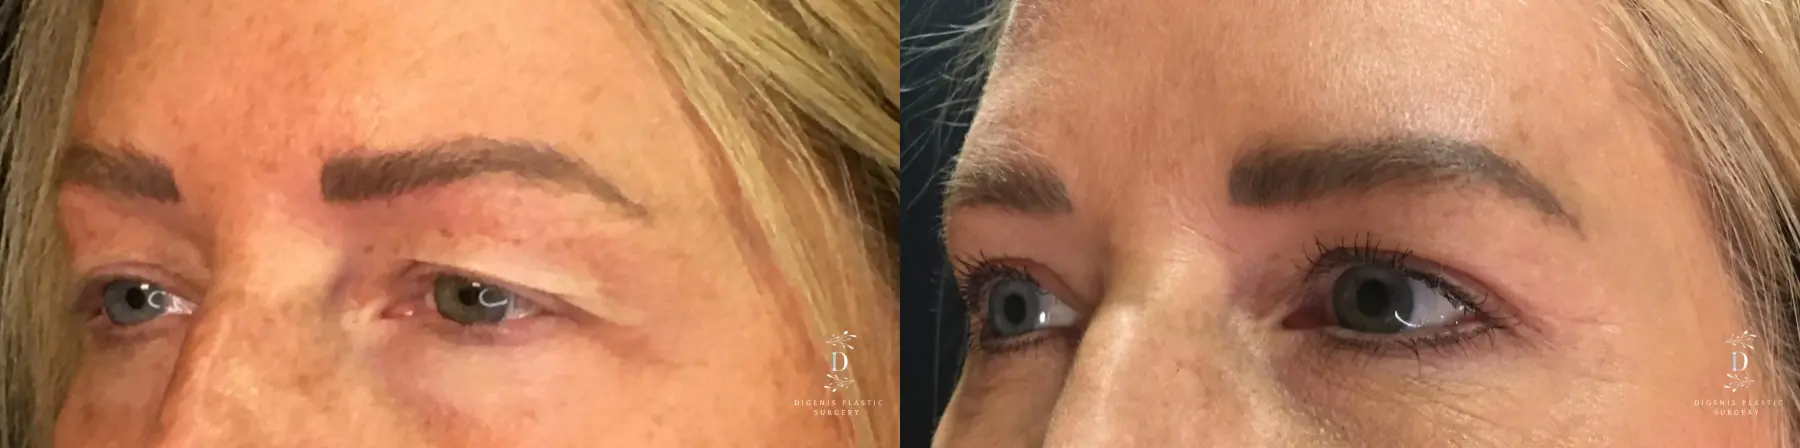 Eyelid Surgery: Patient 13 - Before and After 4